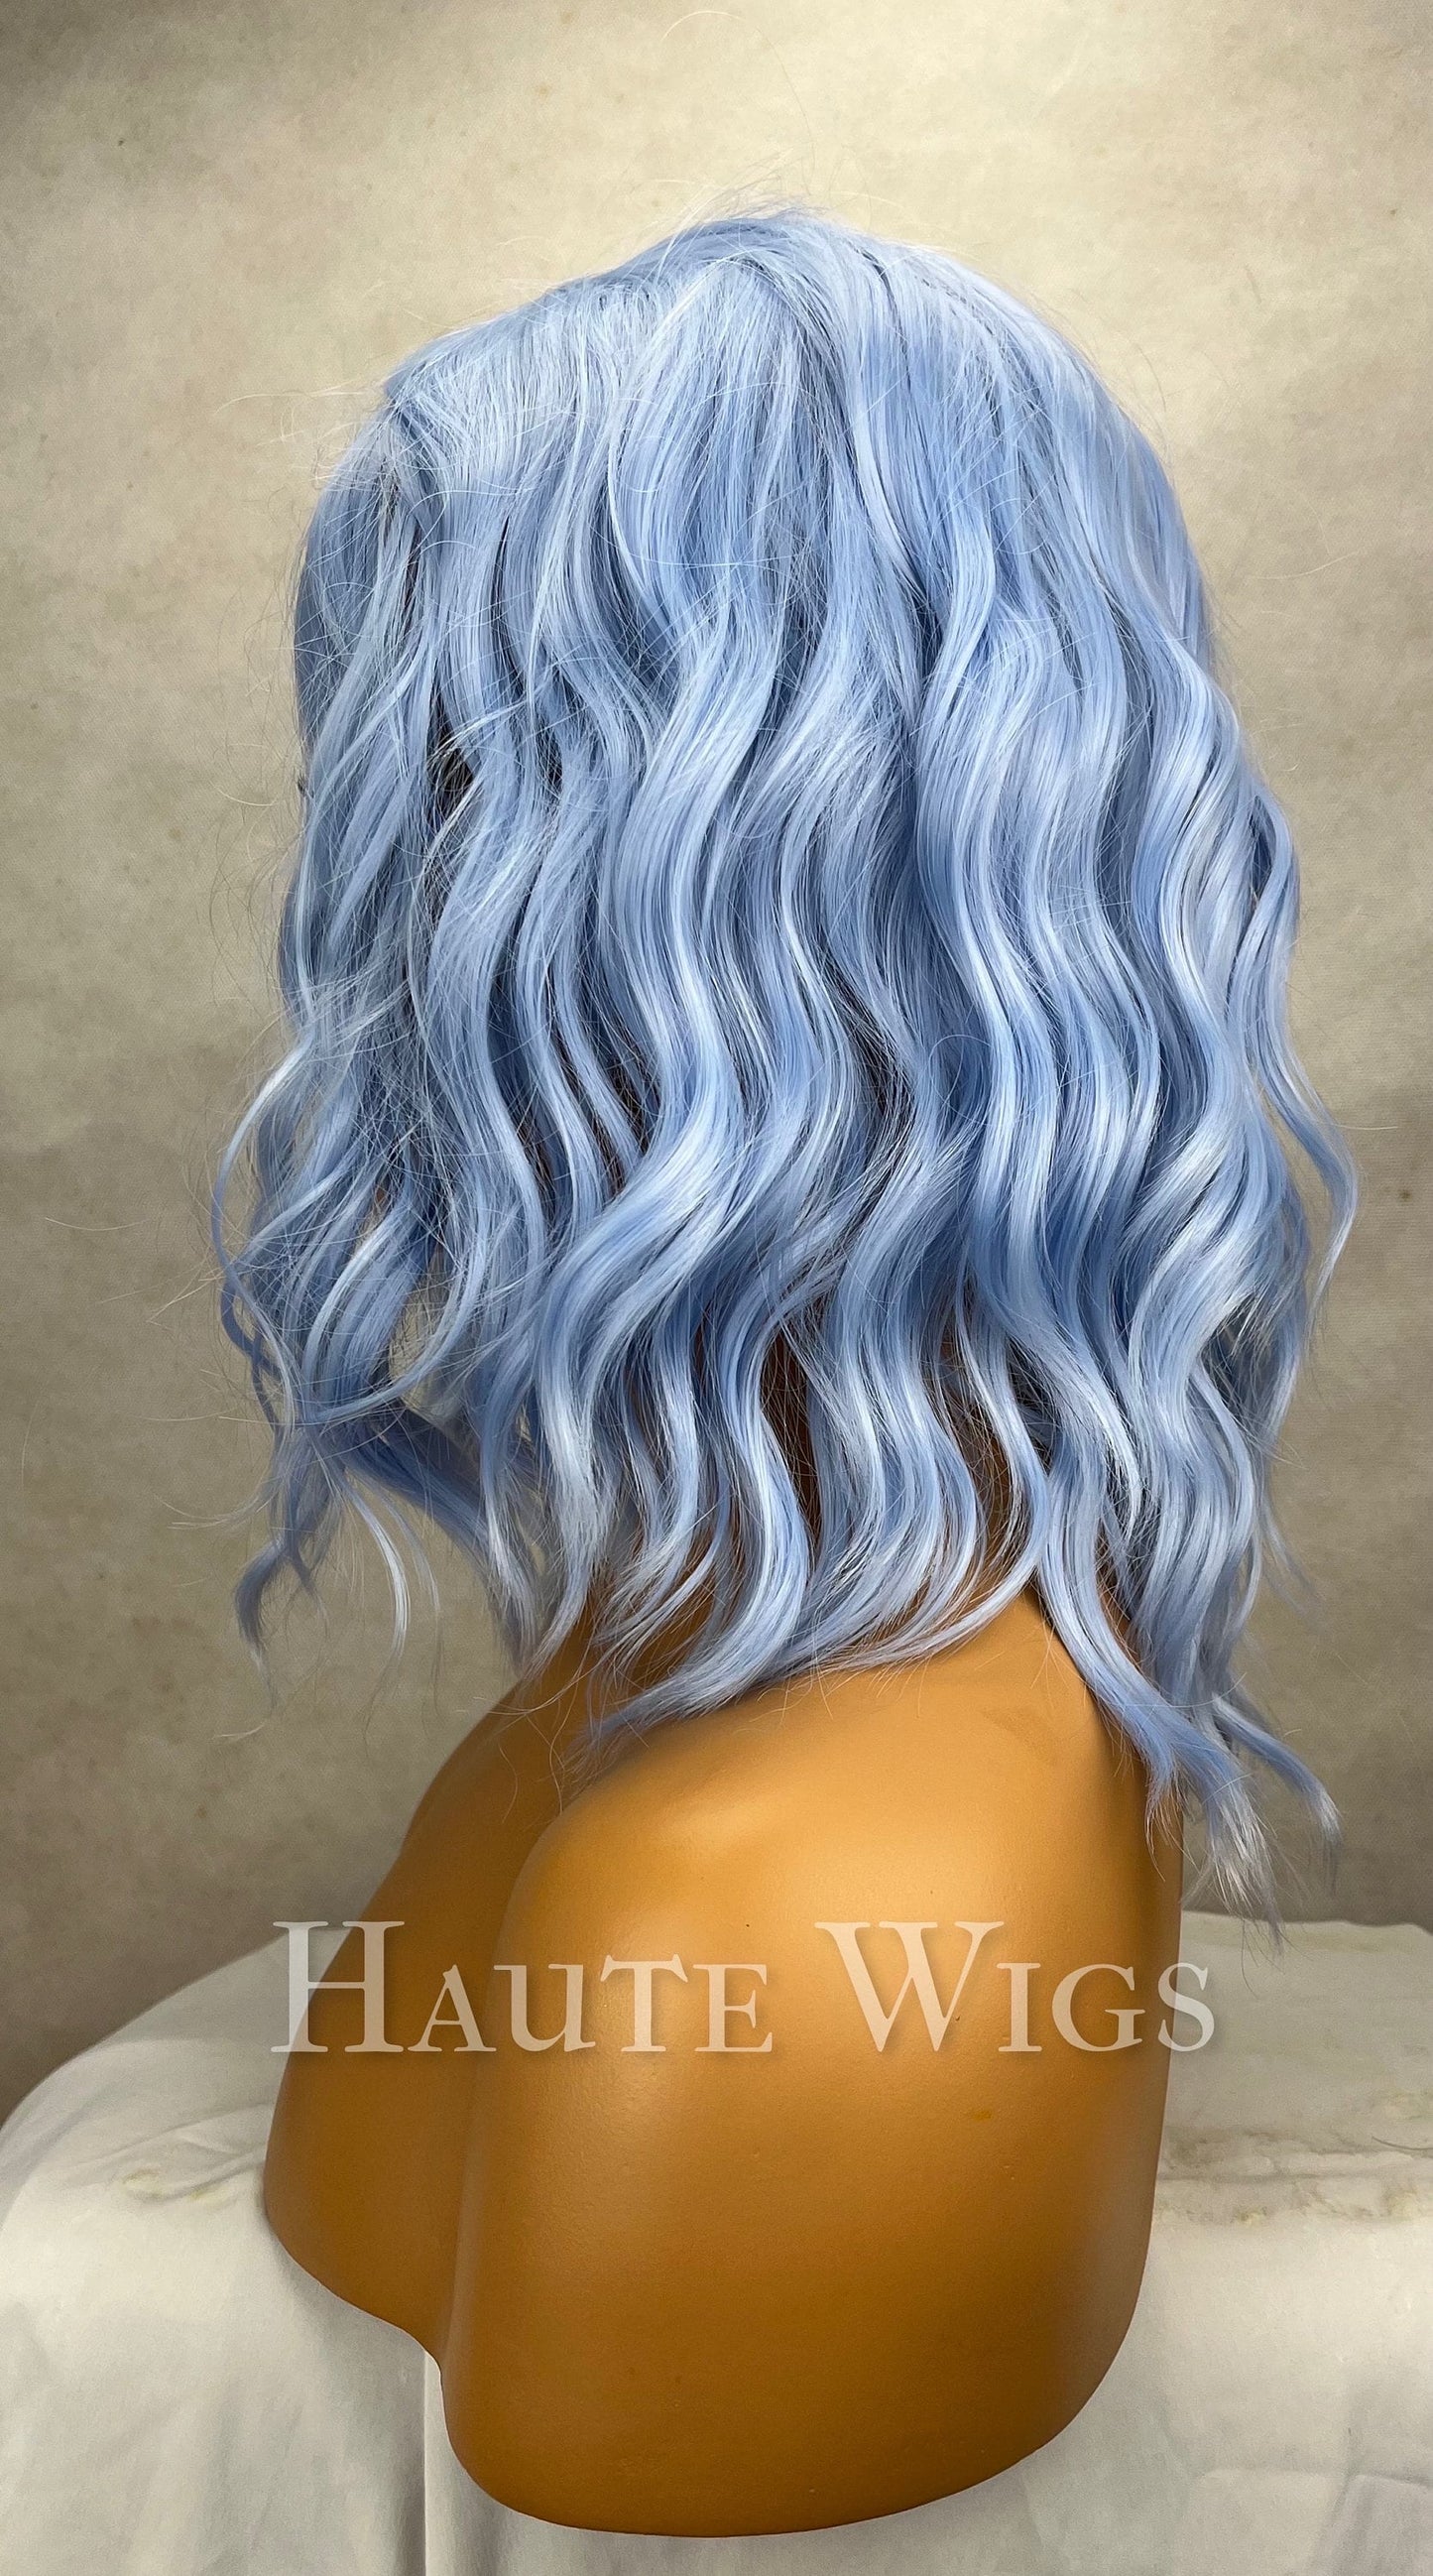 Icy Baby Sky Blue 107 -  12 inch Curly Wavy Light Blue Wig no lace front Synthetic Wig Ladies Womens vegan friendly cute costume haute Wigs